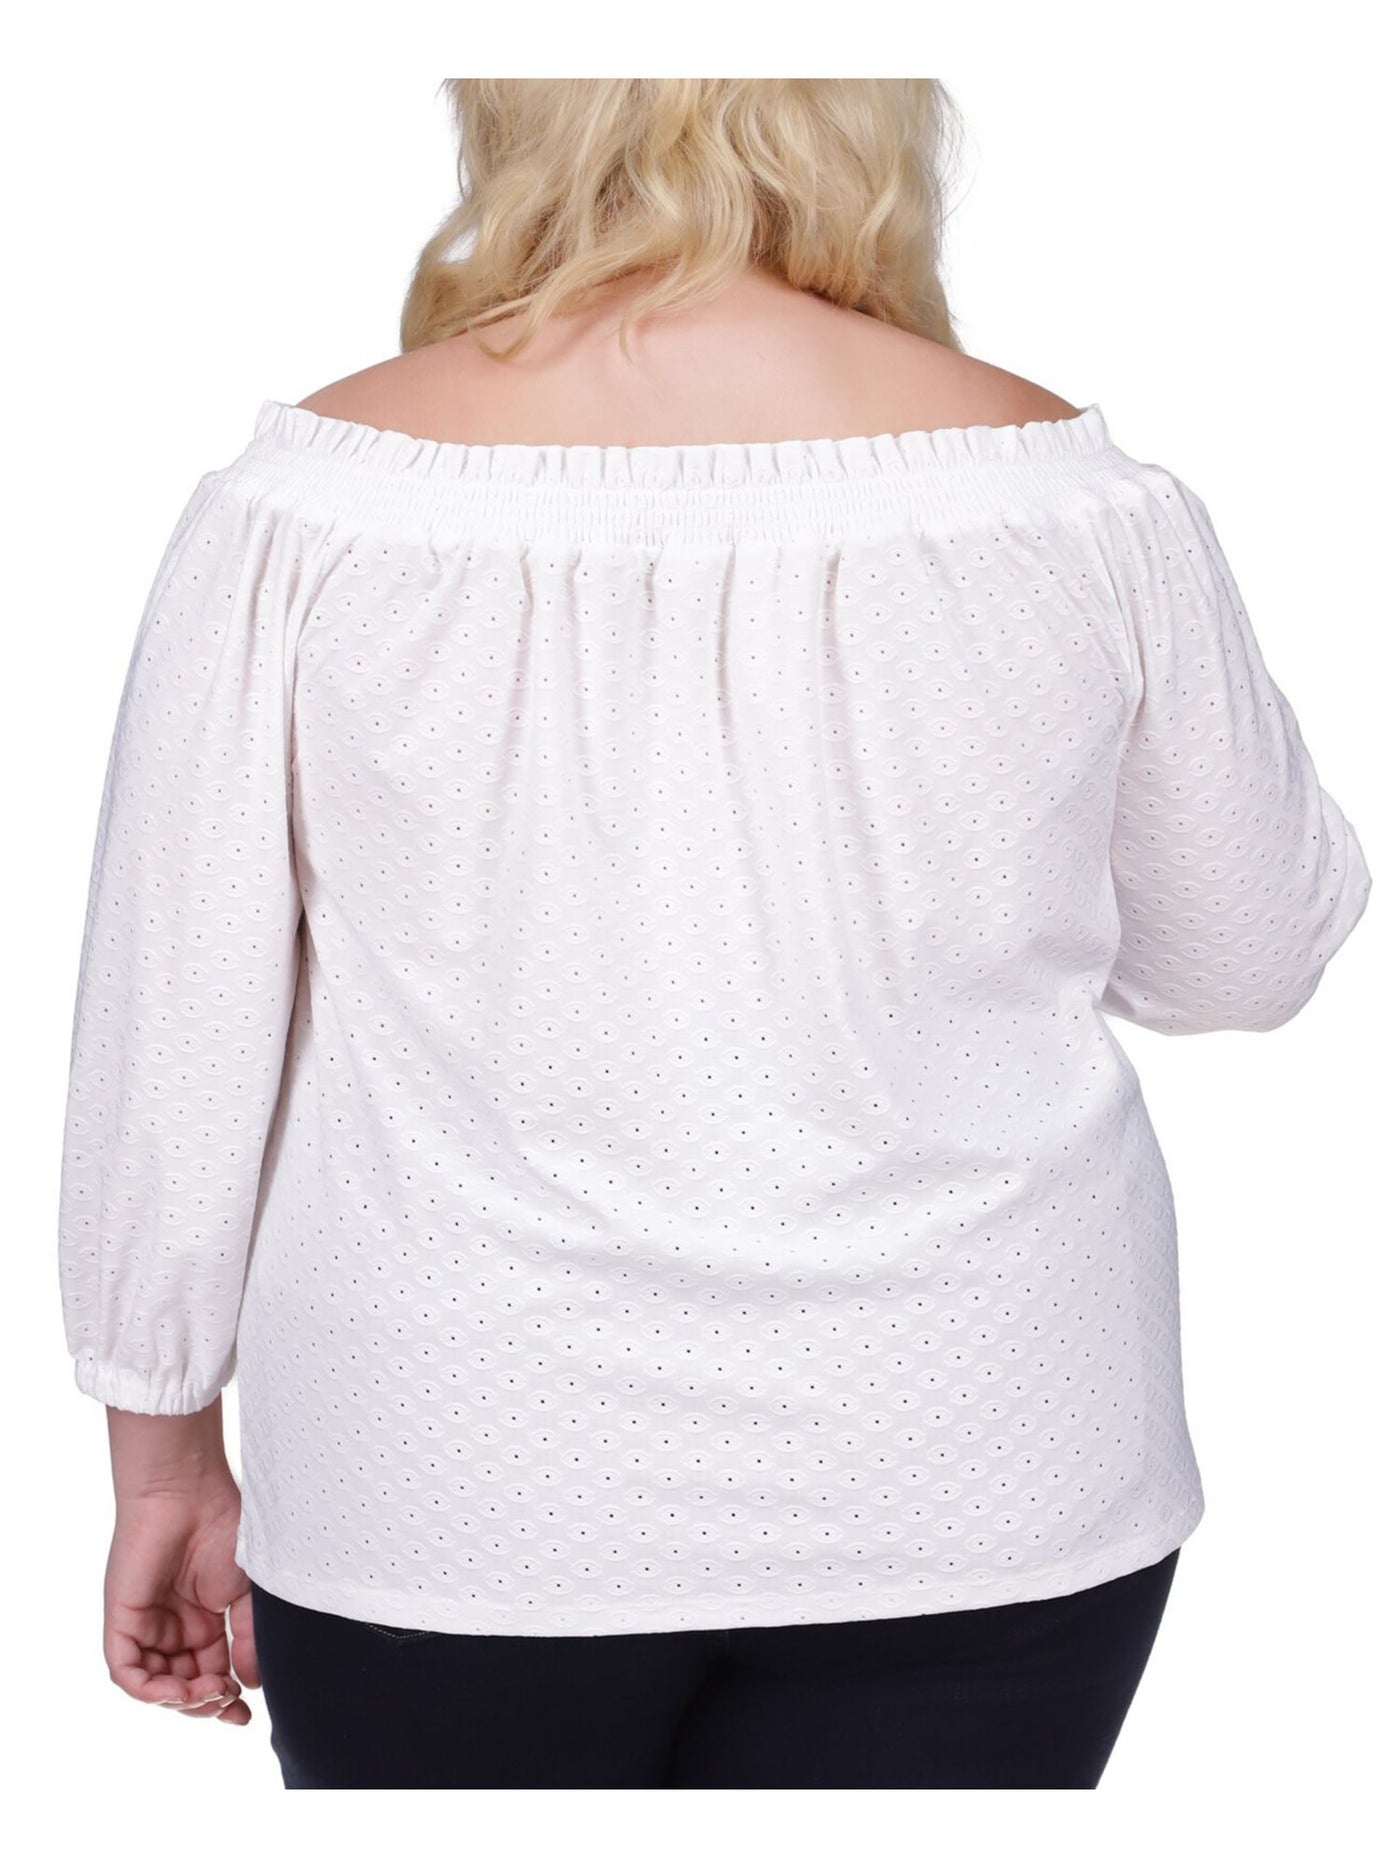 MICHAEL MICHAEL KORS Womens White Eyelet Smocked Elastic Cuffs Unlined 3/4 Sleeve Boat Neck Top Plus 1X